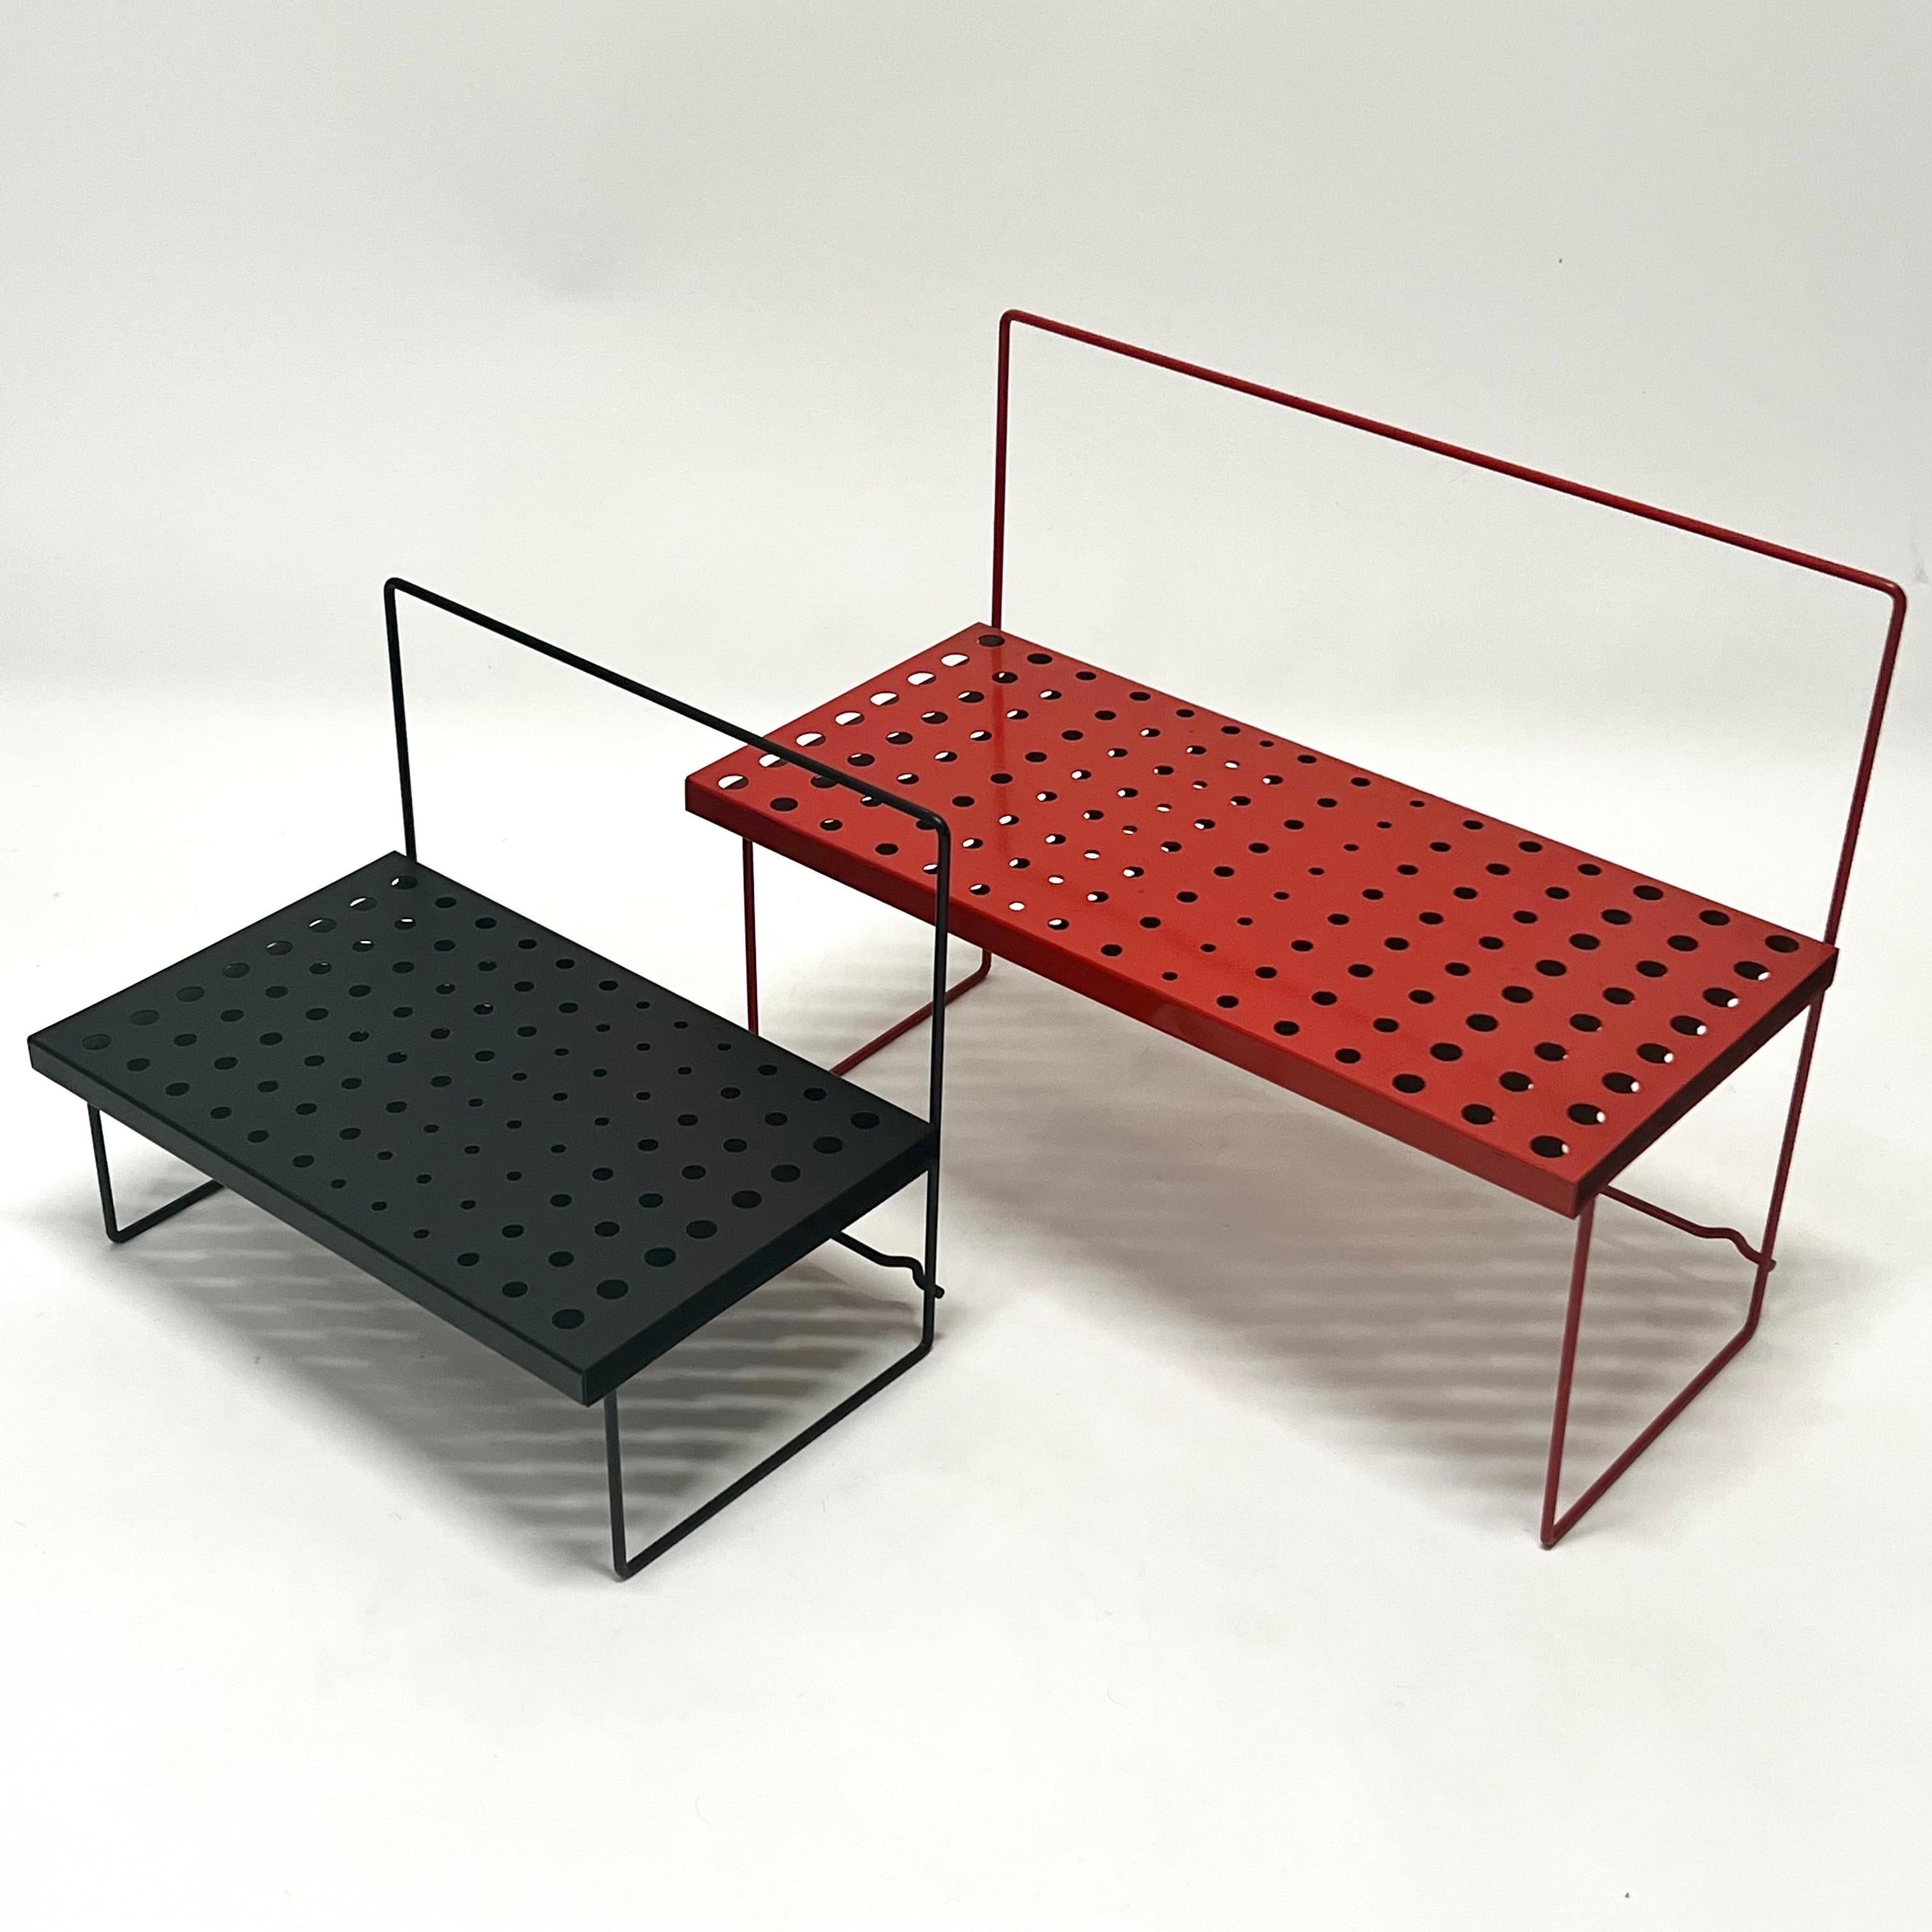 Vintage French Modern Perforated Metal Plant Stands, c1960s For Sale 1